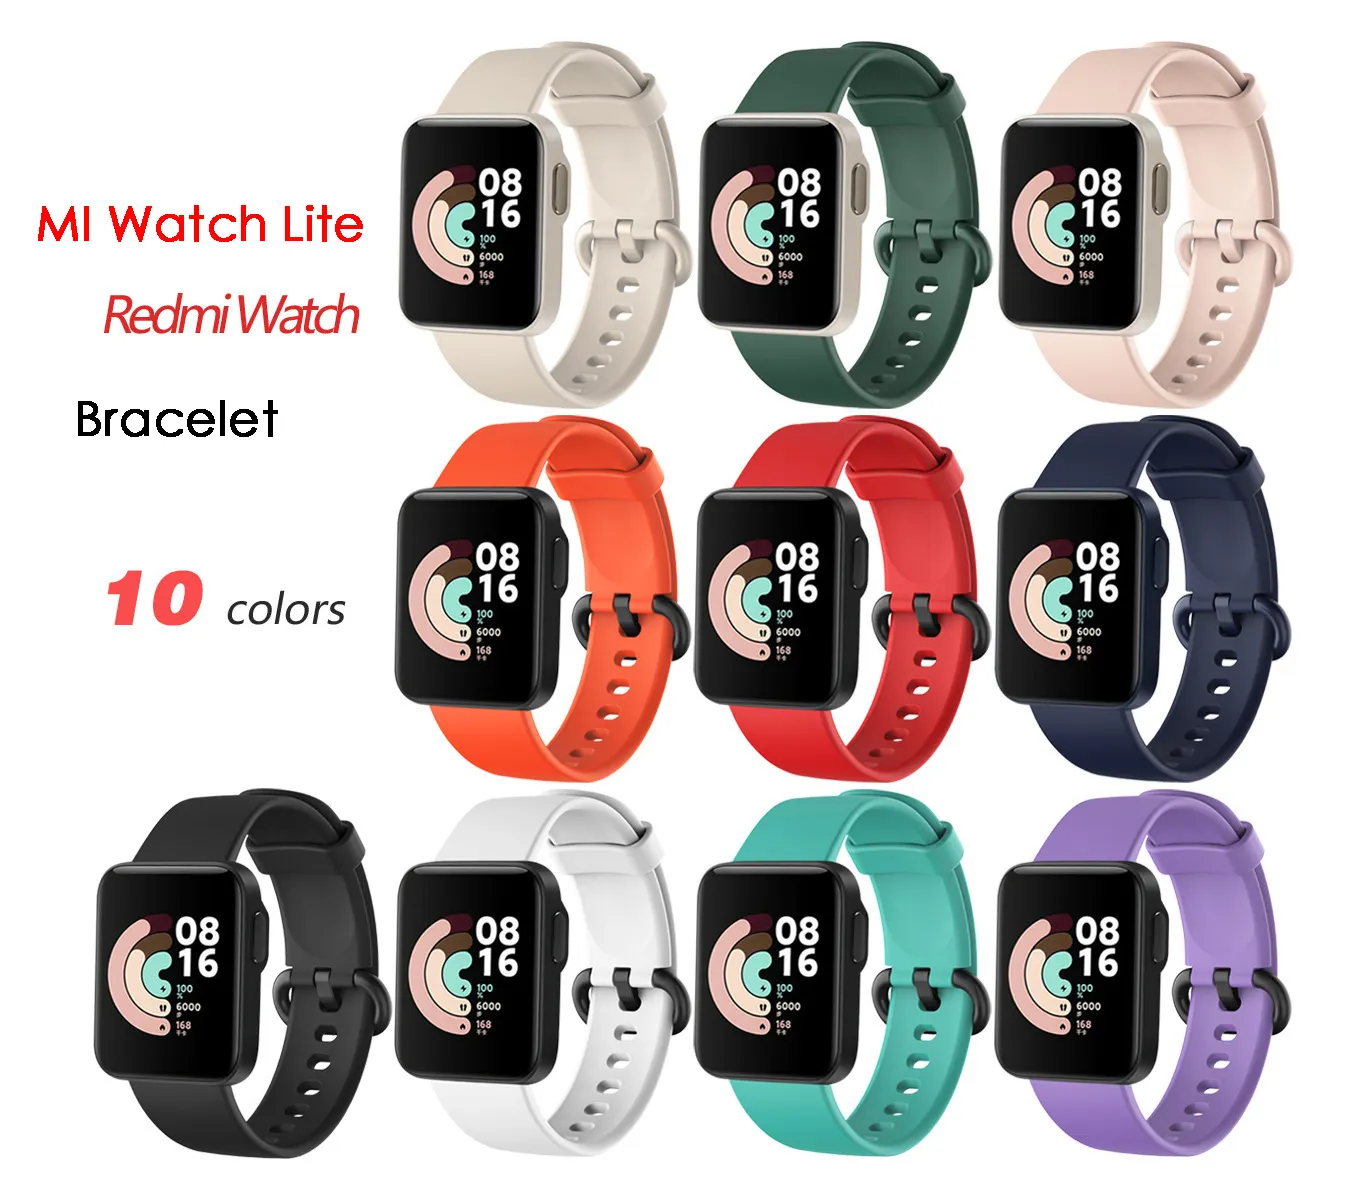 For Xiaomi Mi Watch Lite Global Version Silicone Strap Replacement Colorful Wristband for Redmi Watch Bracelet Smart Watch